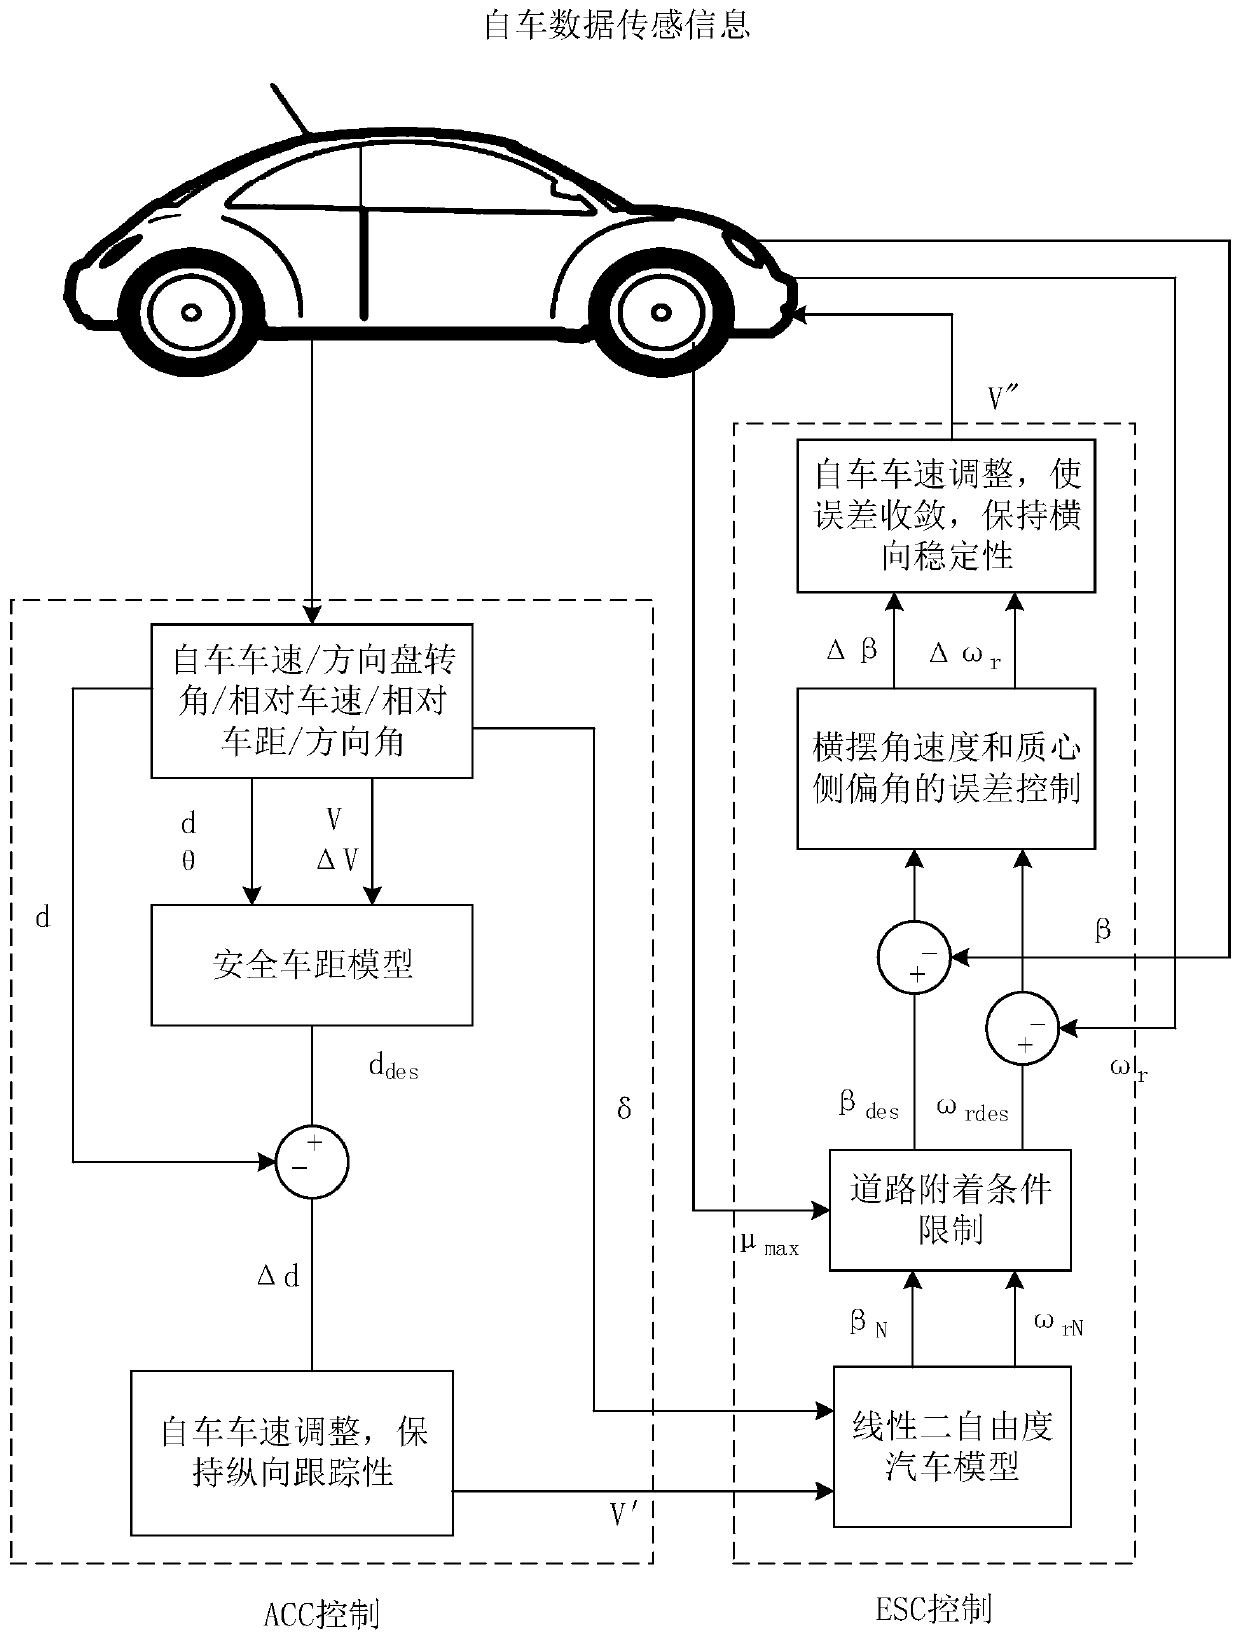 Adaptive cruise system with stability active control and adaptive cruise control method with stability active control